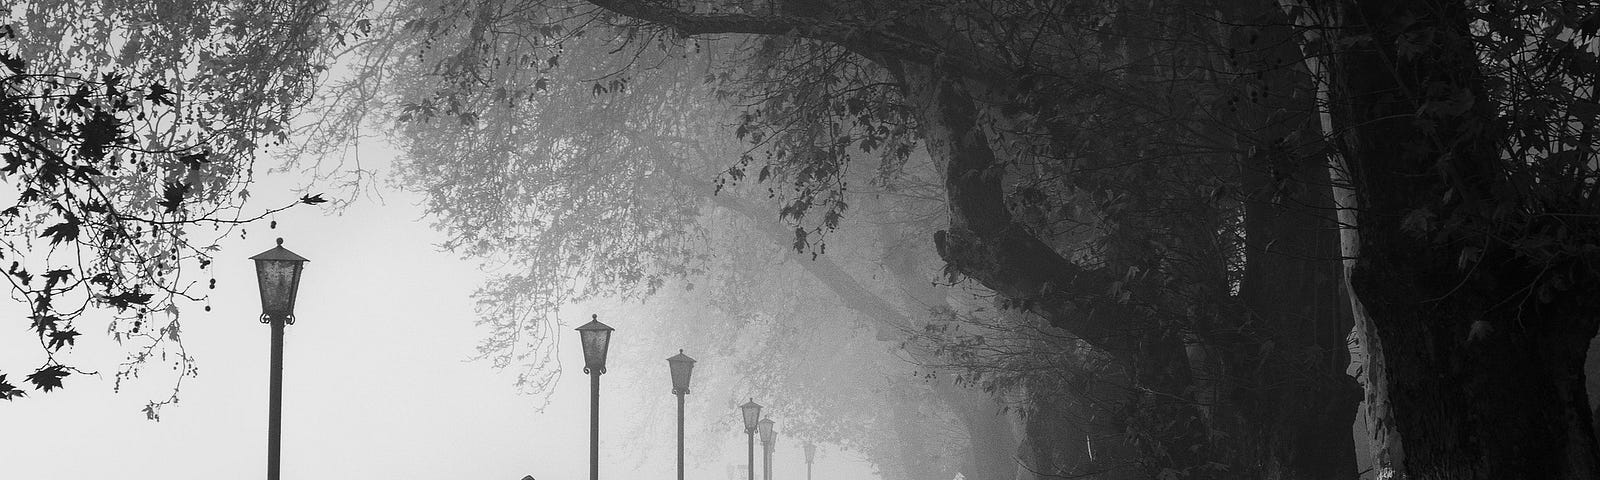 A mist filled strand where people are strolling with one man in foreground by himself